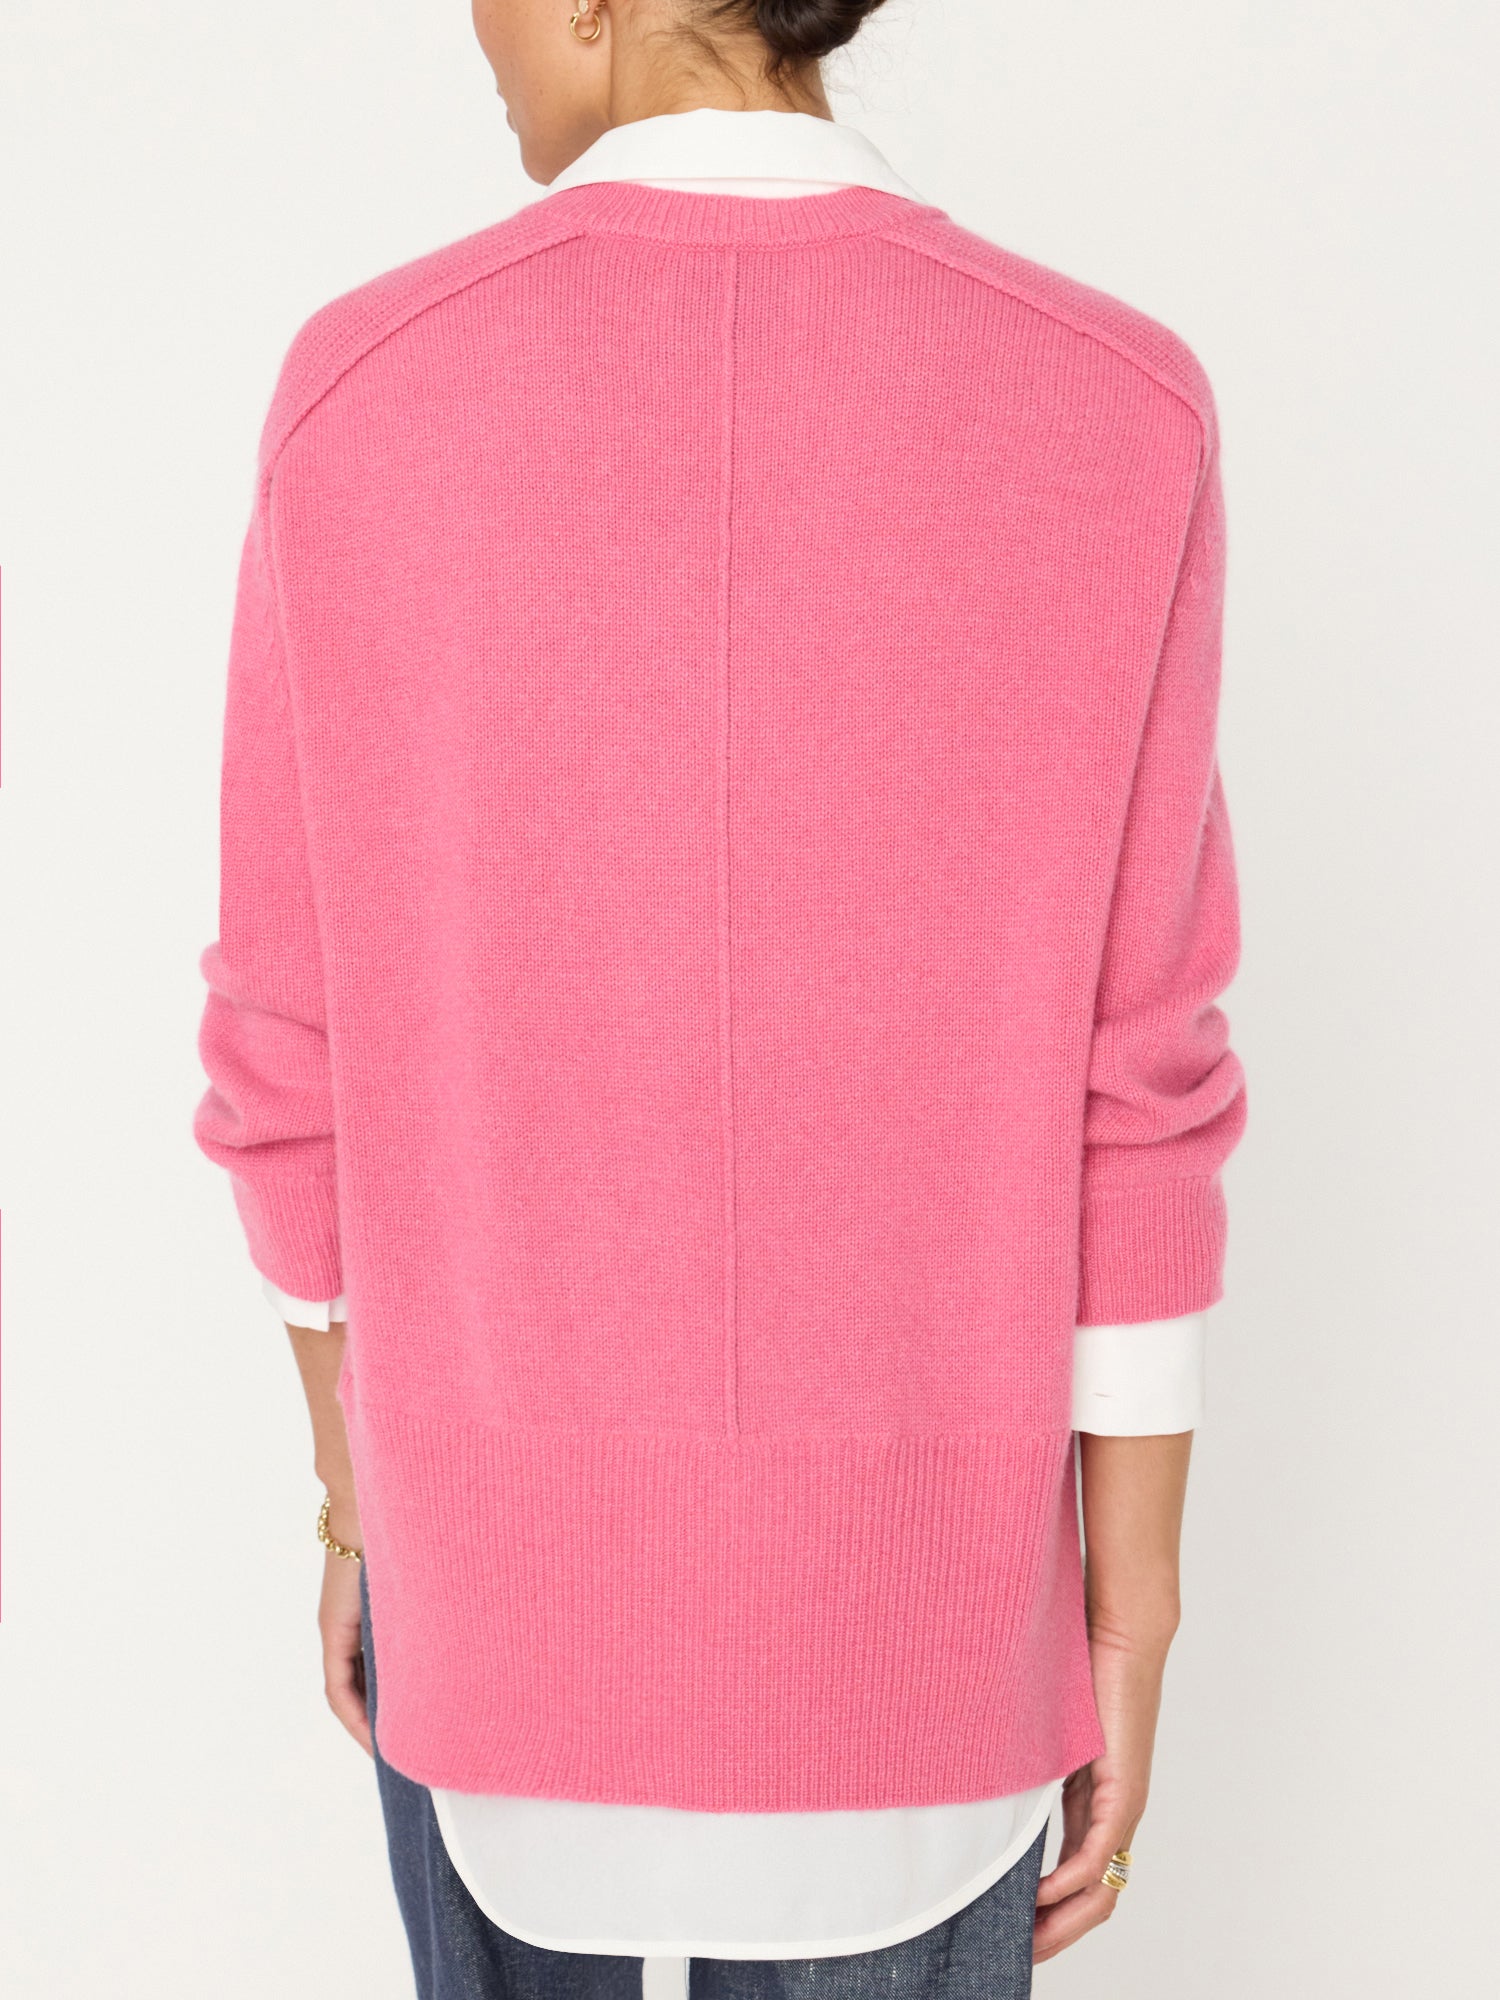 Looker hot pink layered v-neck sweater back view